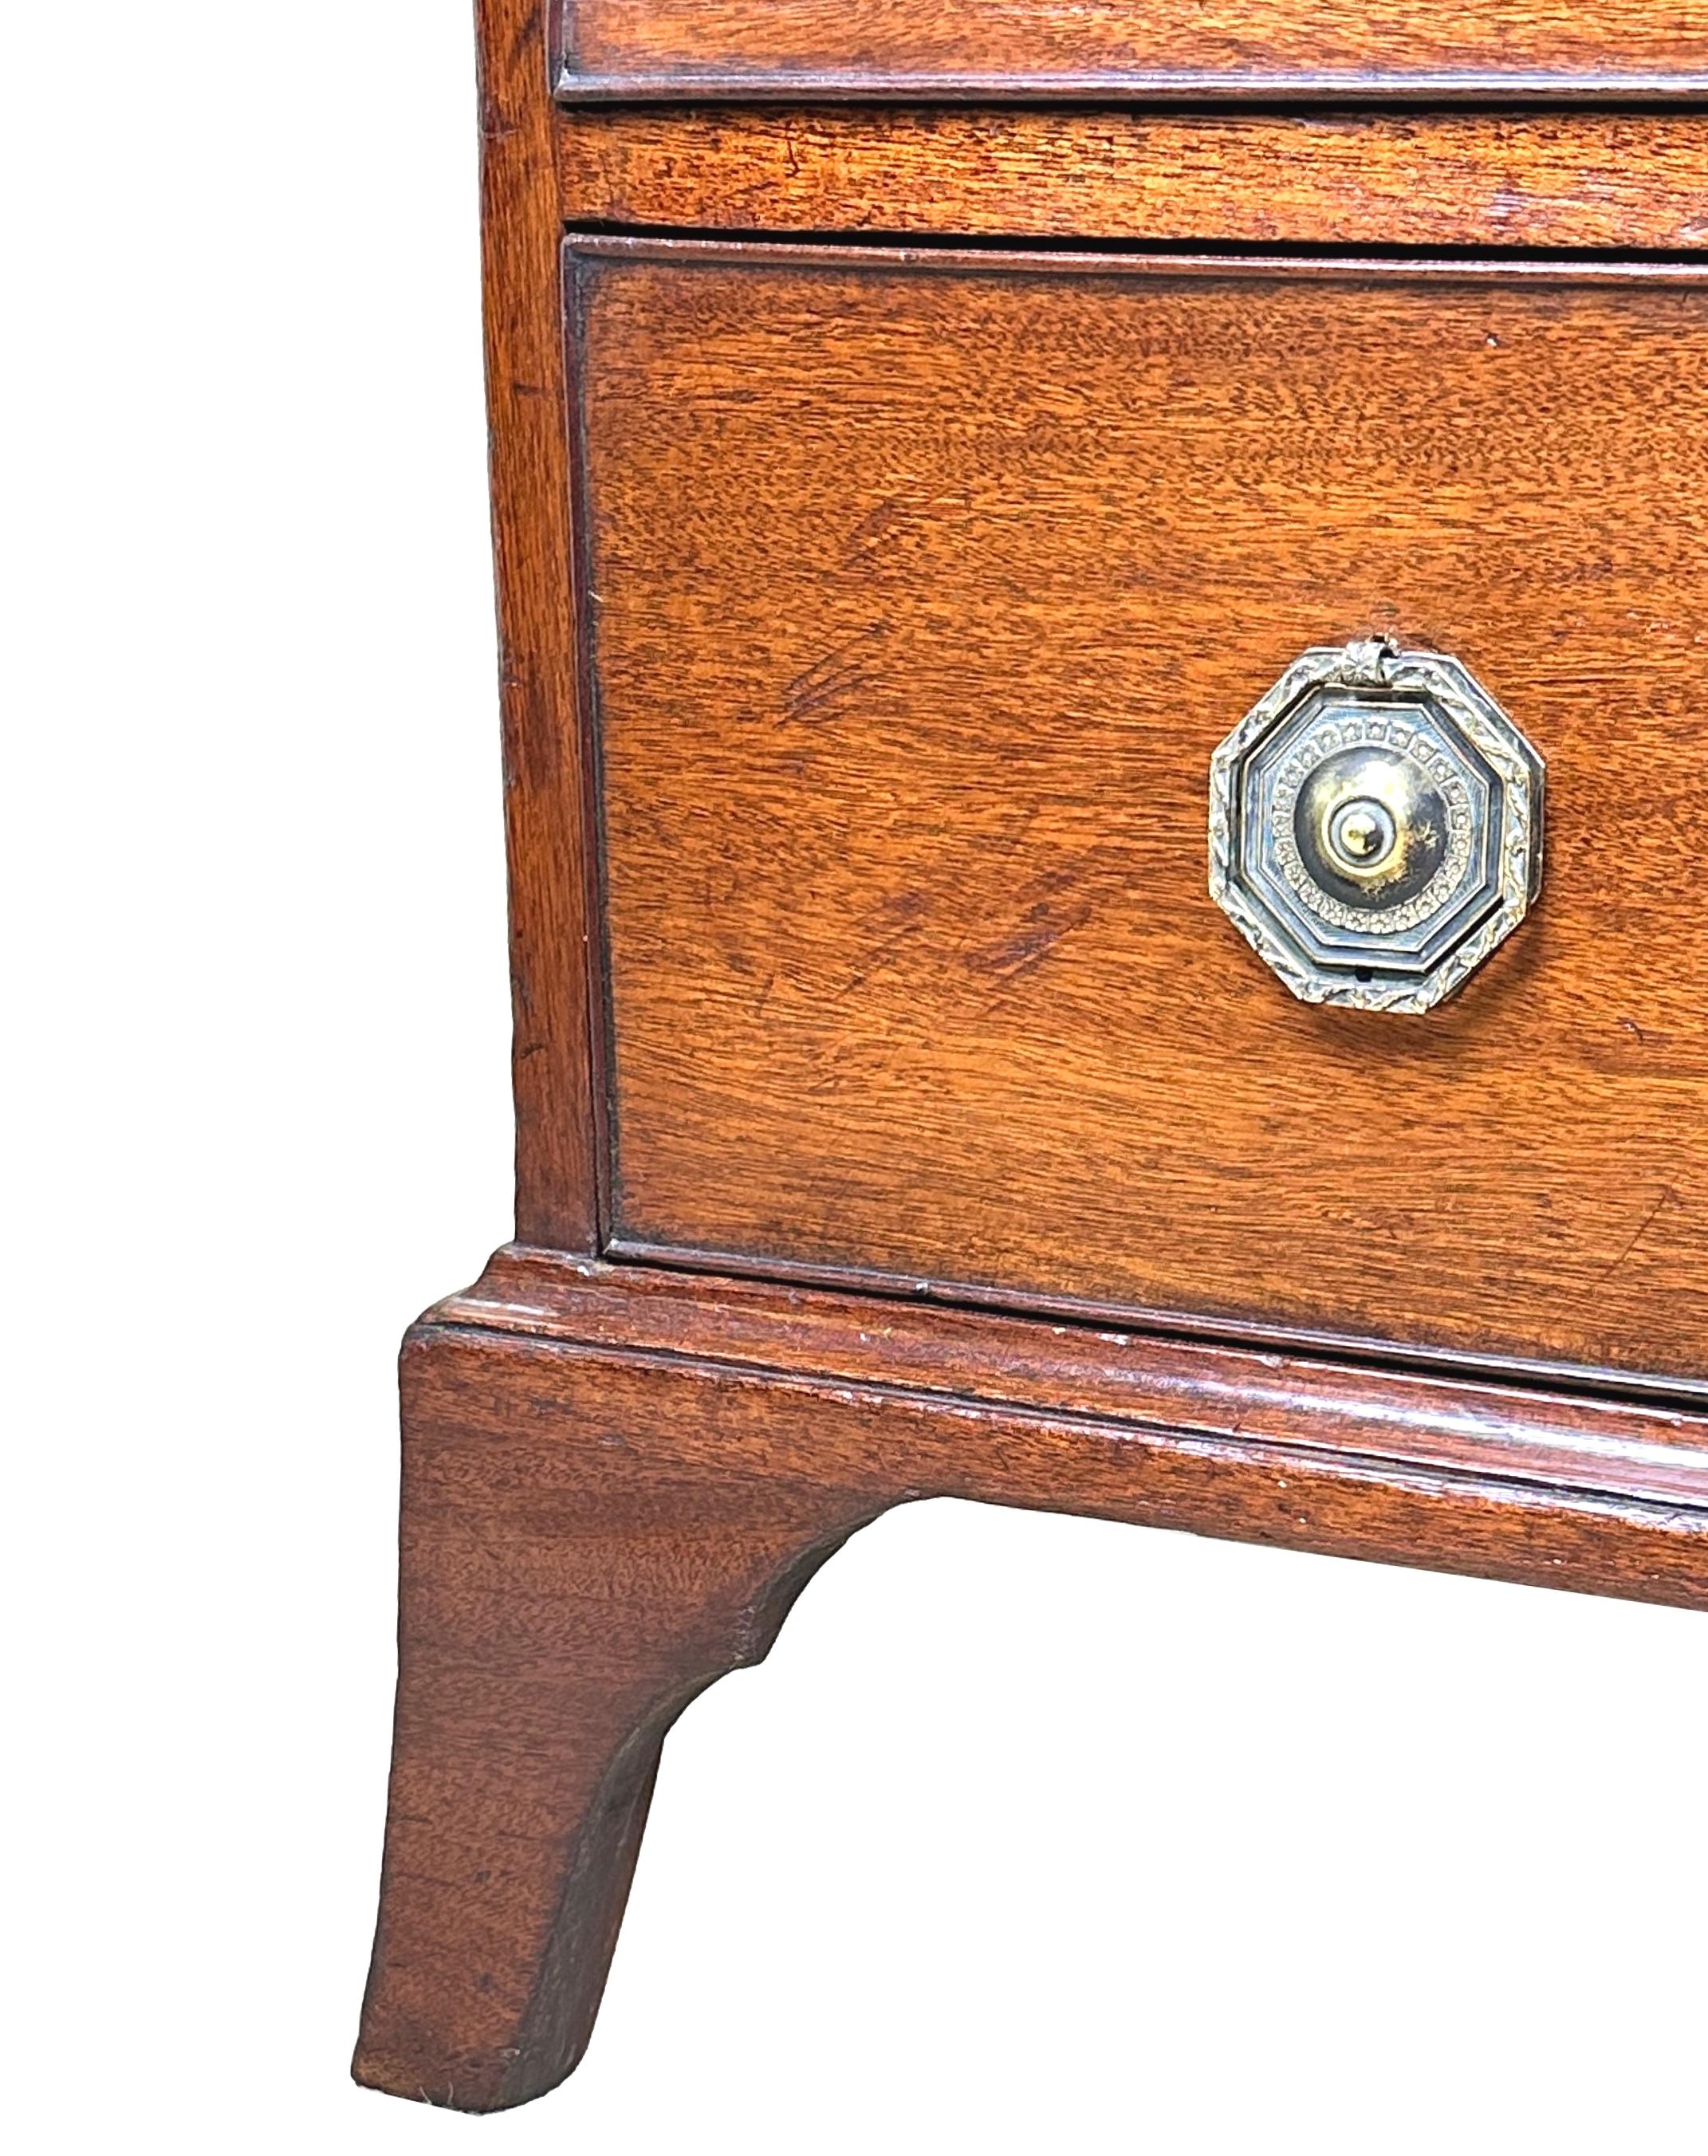 A Very Good Quality Late 18th Century, George III Period Mahogany Chest, Of Rare Small Proportions, Having Well Figured Rectangular Top Over Four Long Drawers, With Replacement Brass Plate Handles, Raised On Elegant Original Splay Bracket